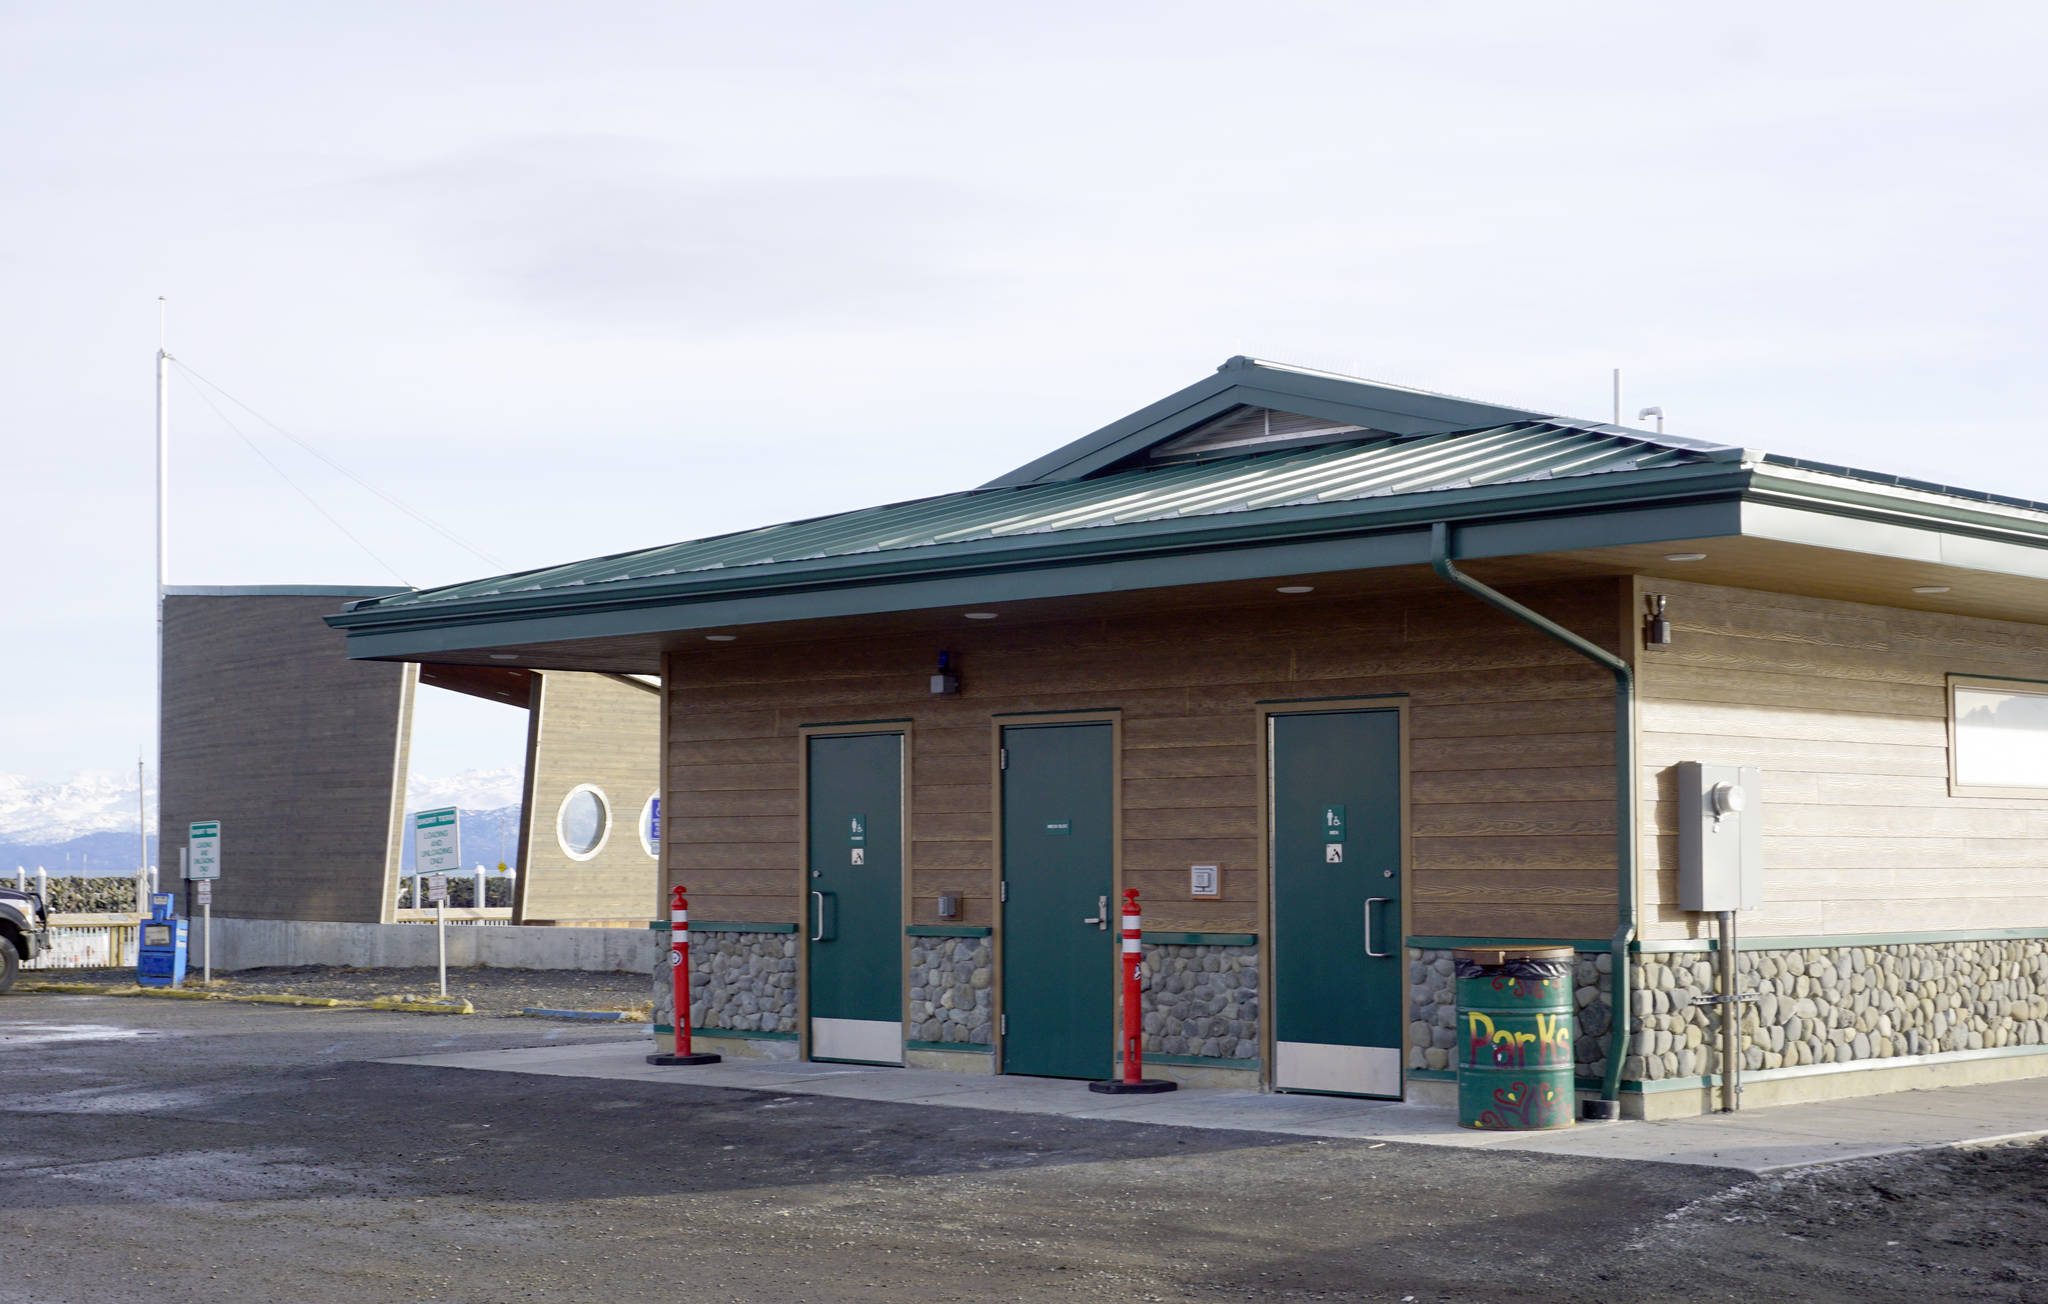 The new Ramp 2 restrooms on the Homer Spit in Homer, Alaska, as seen on Feb. 8, 2019. The restrooms opened on Feb. 2. (Photo by Michael Armstrong/Homer New